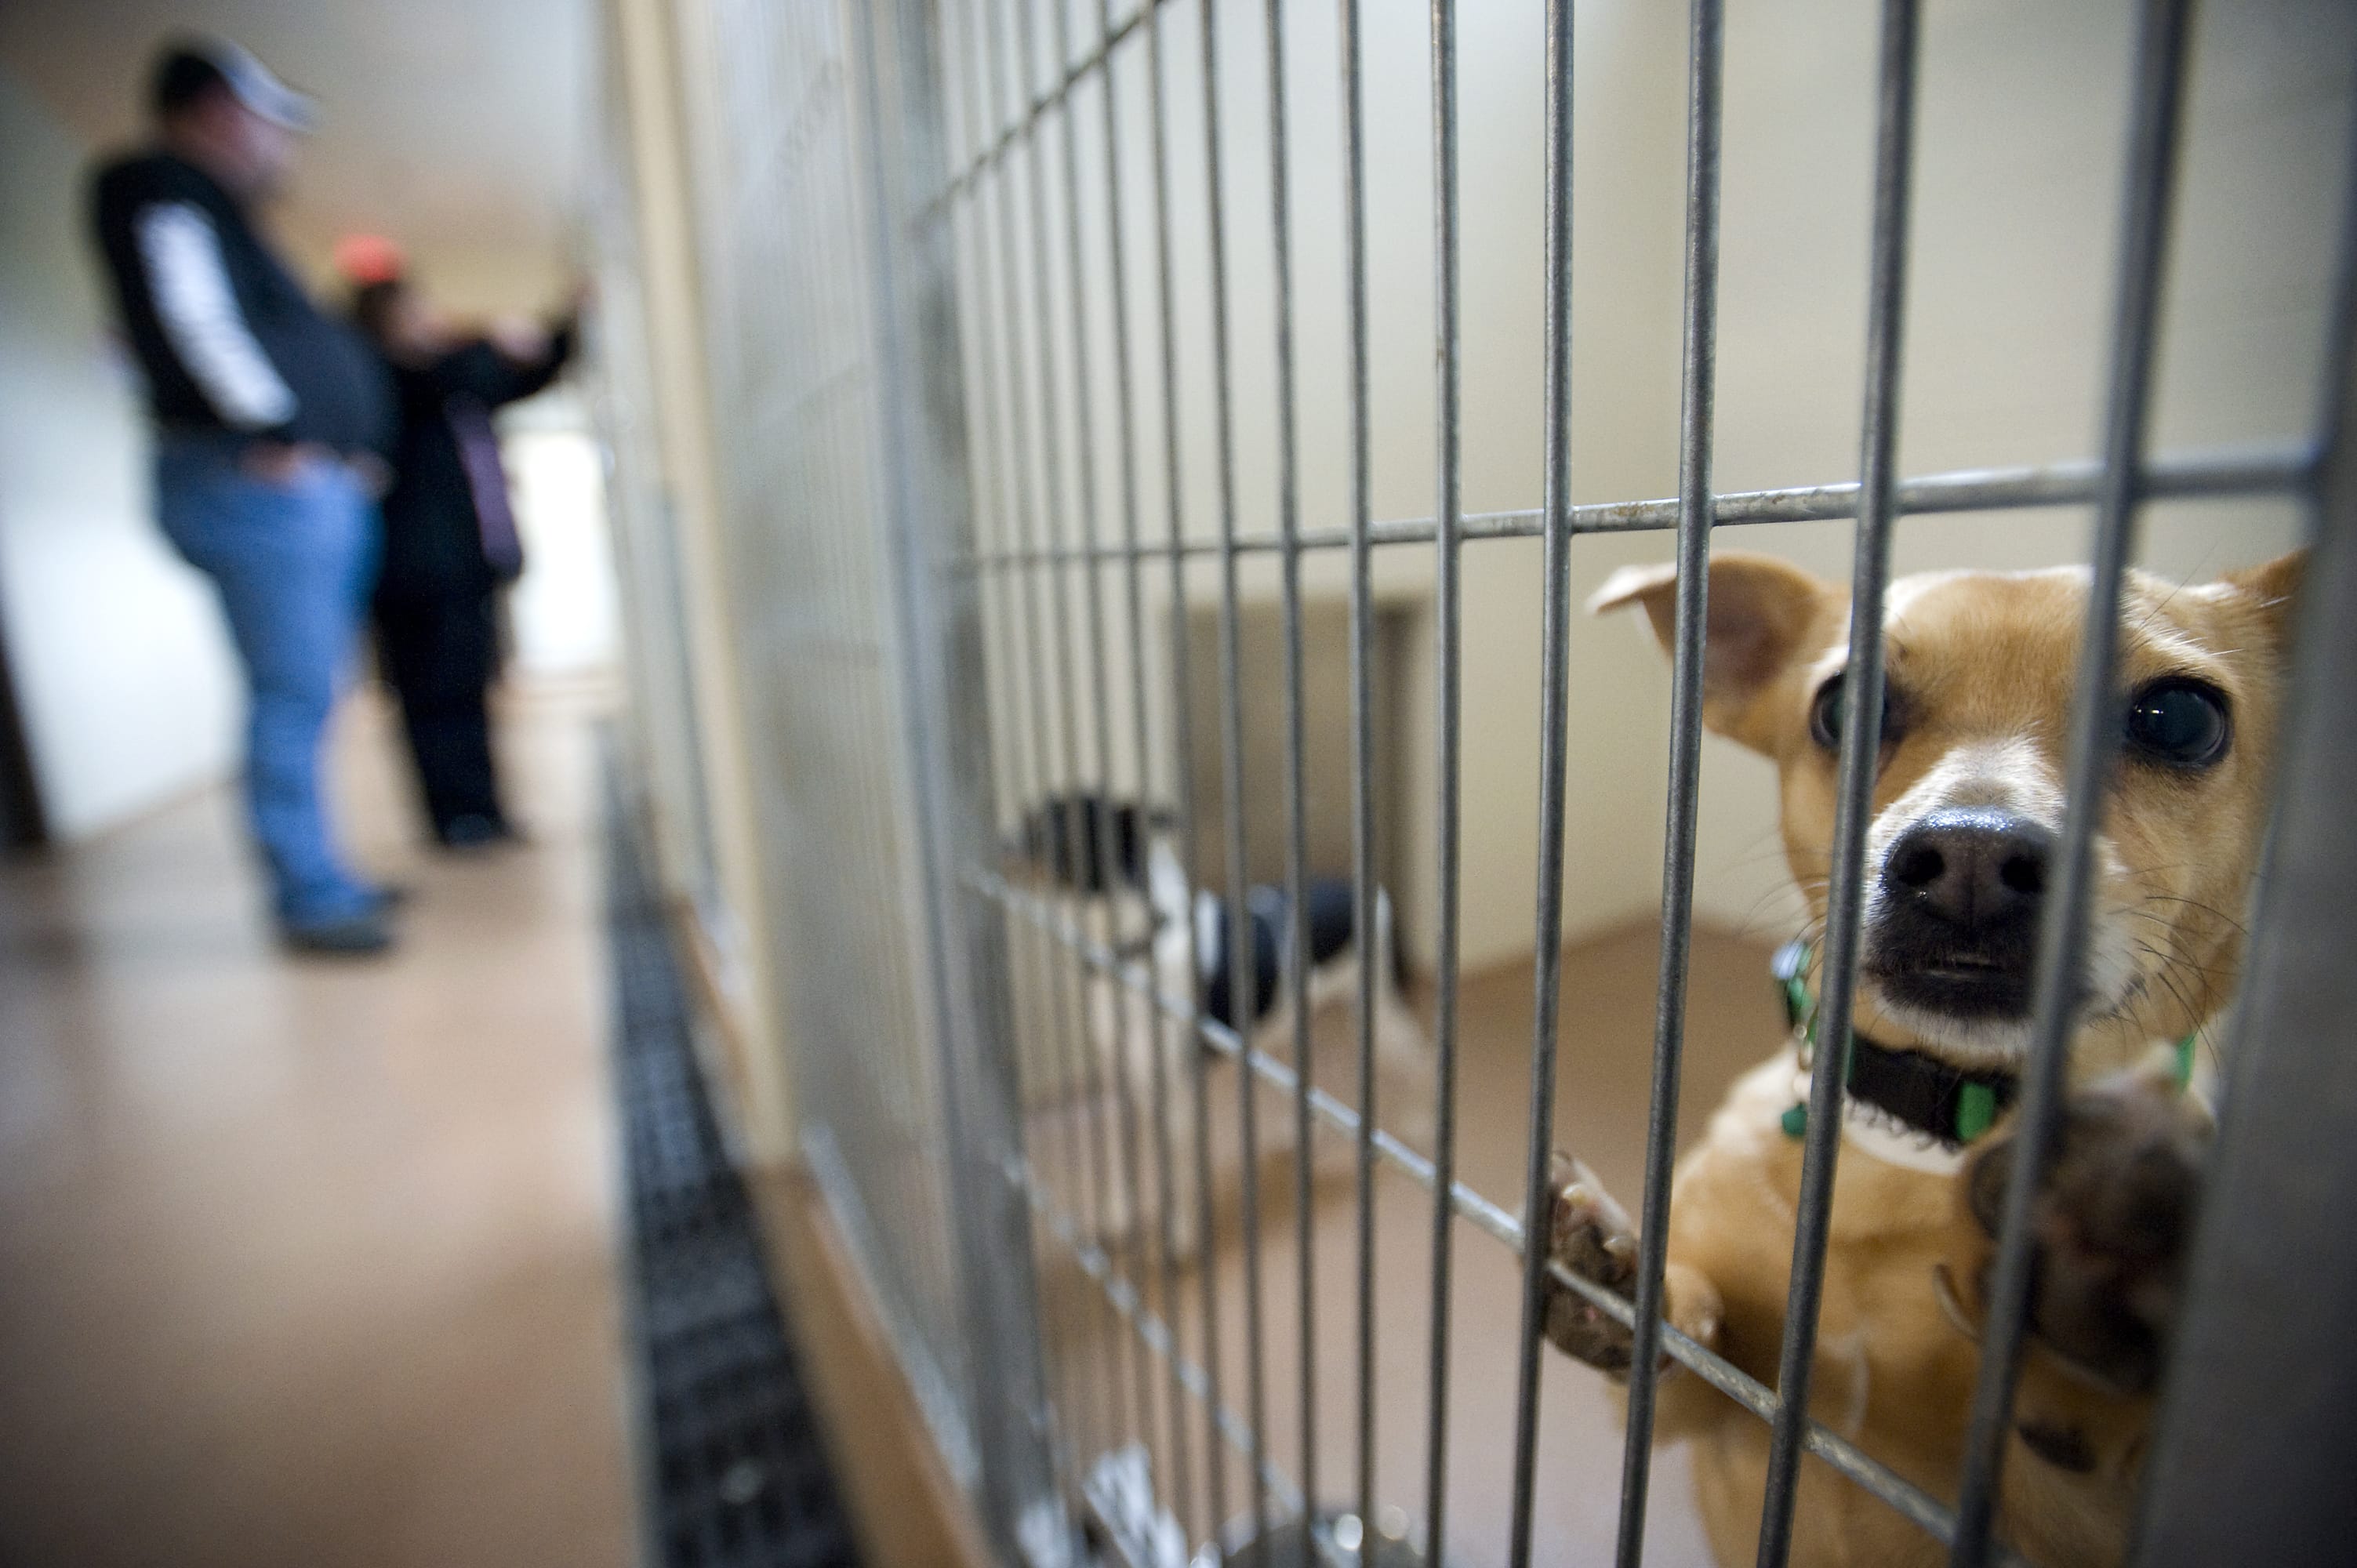 The Humane Society for Southwest Washington wants Clark County to pay more for services the shelter provides.